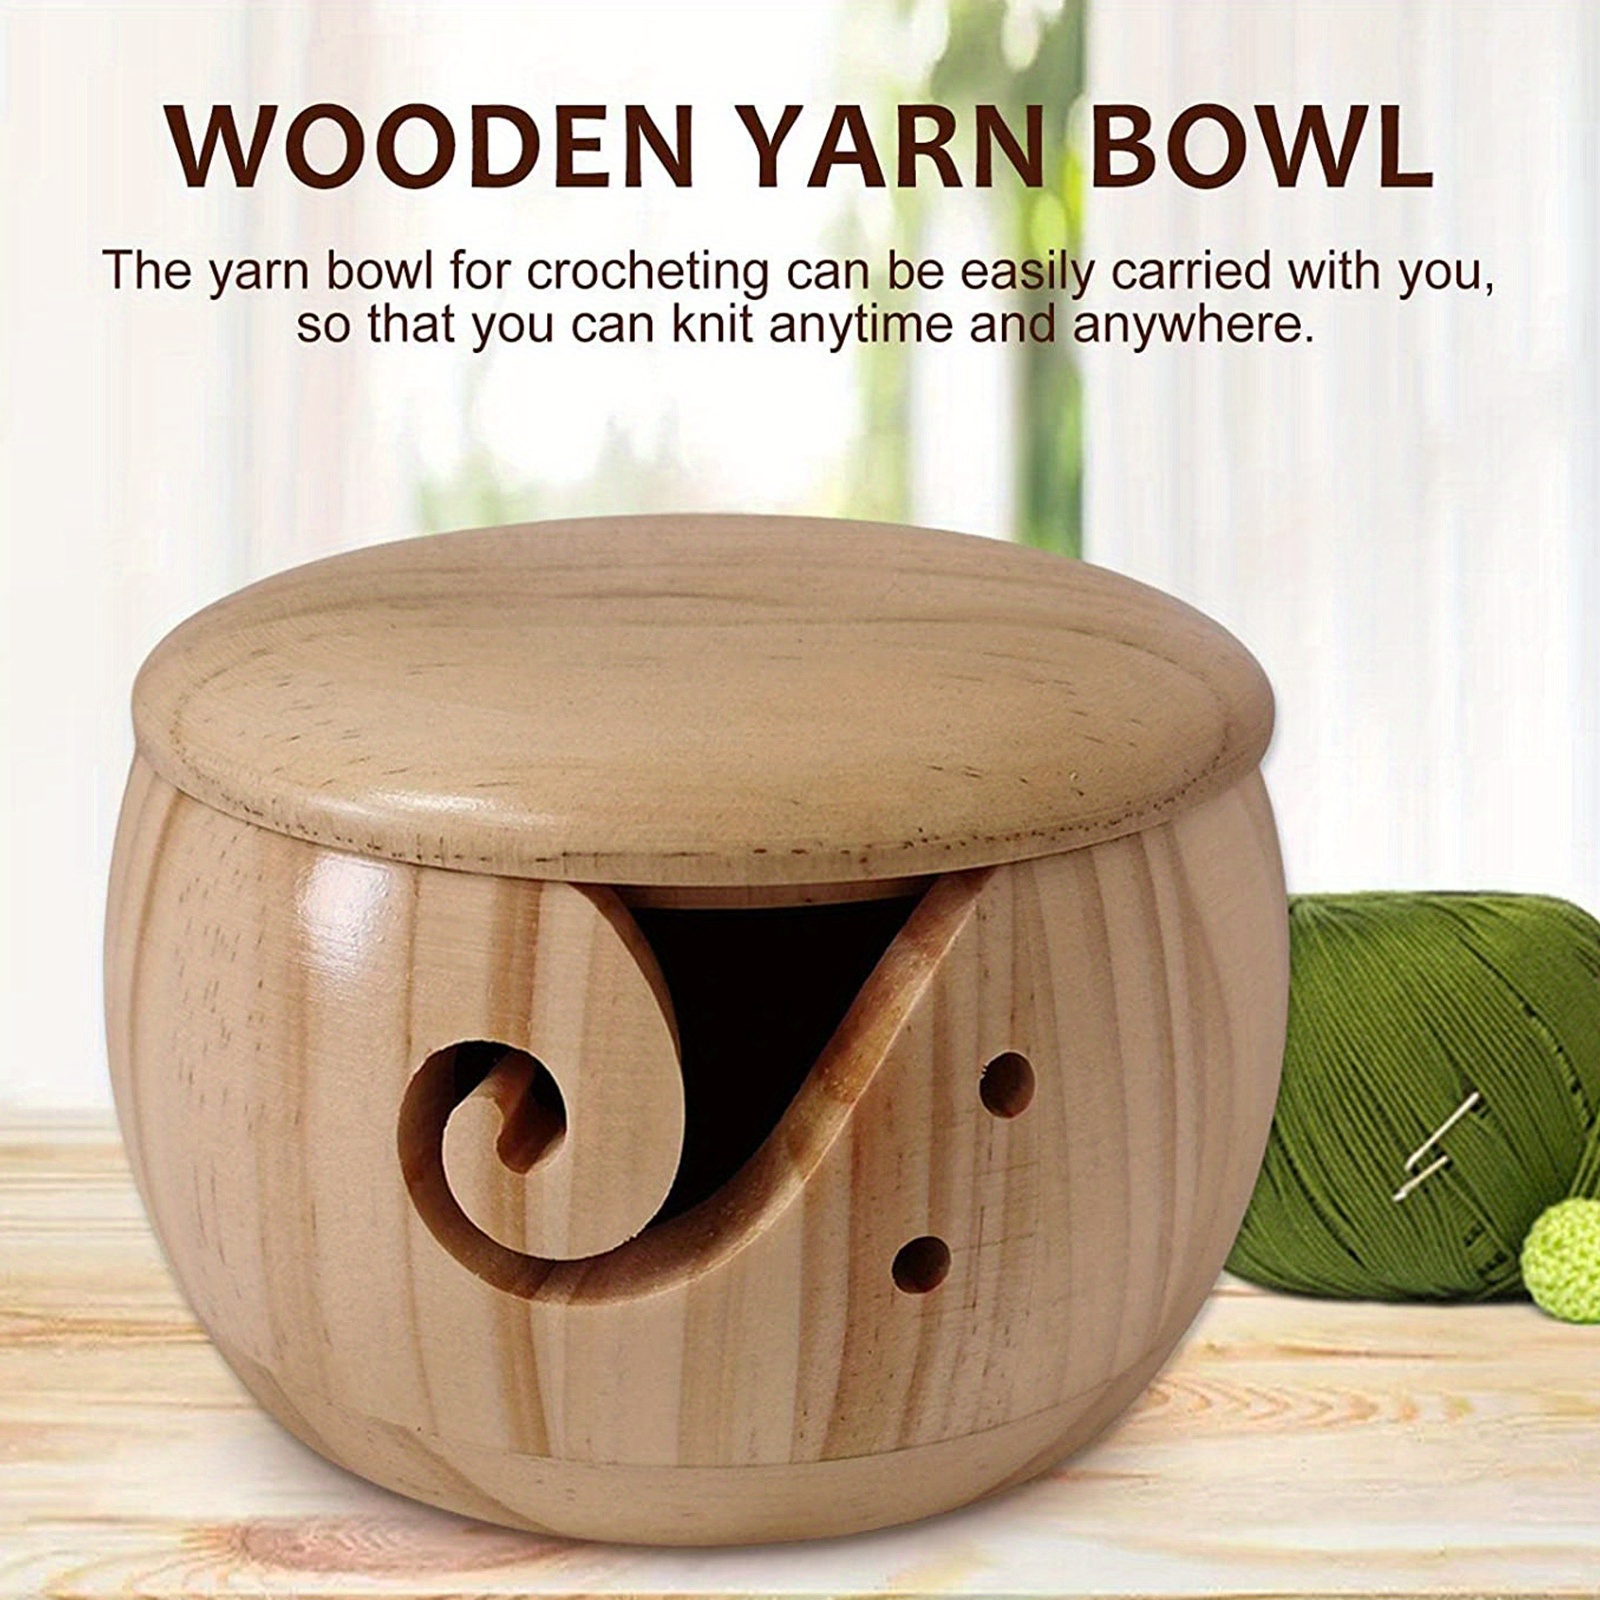 ZJchao Yarn Bowl Handmade Crafted Wooden Yarn Bowl with Removable Lid for  Knitting and Crocheting, for Mom and Grandmother